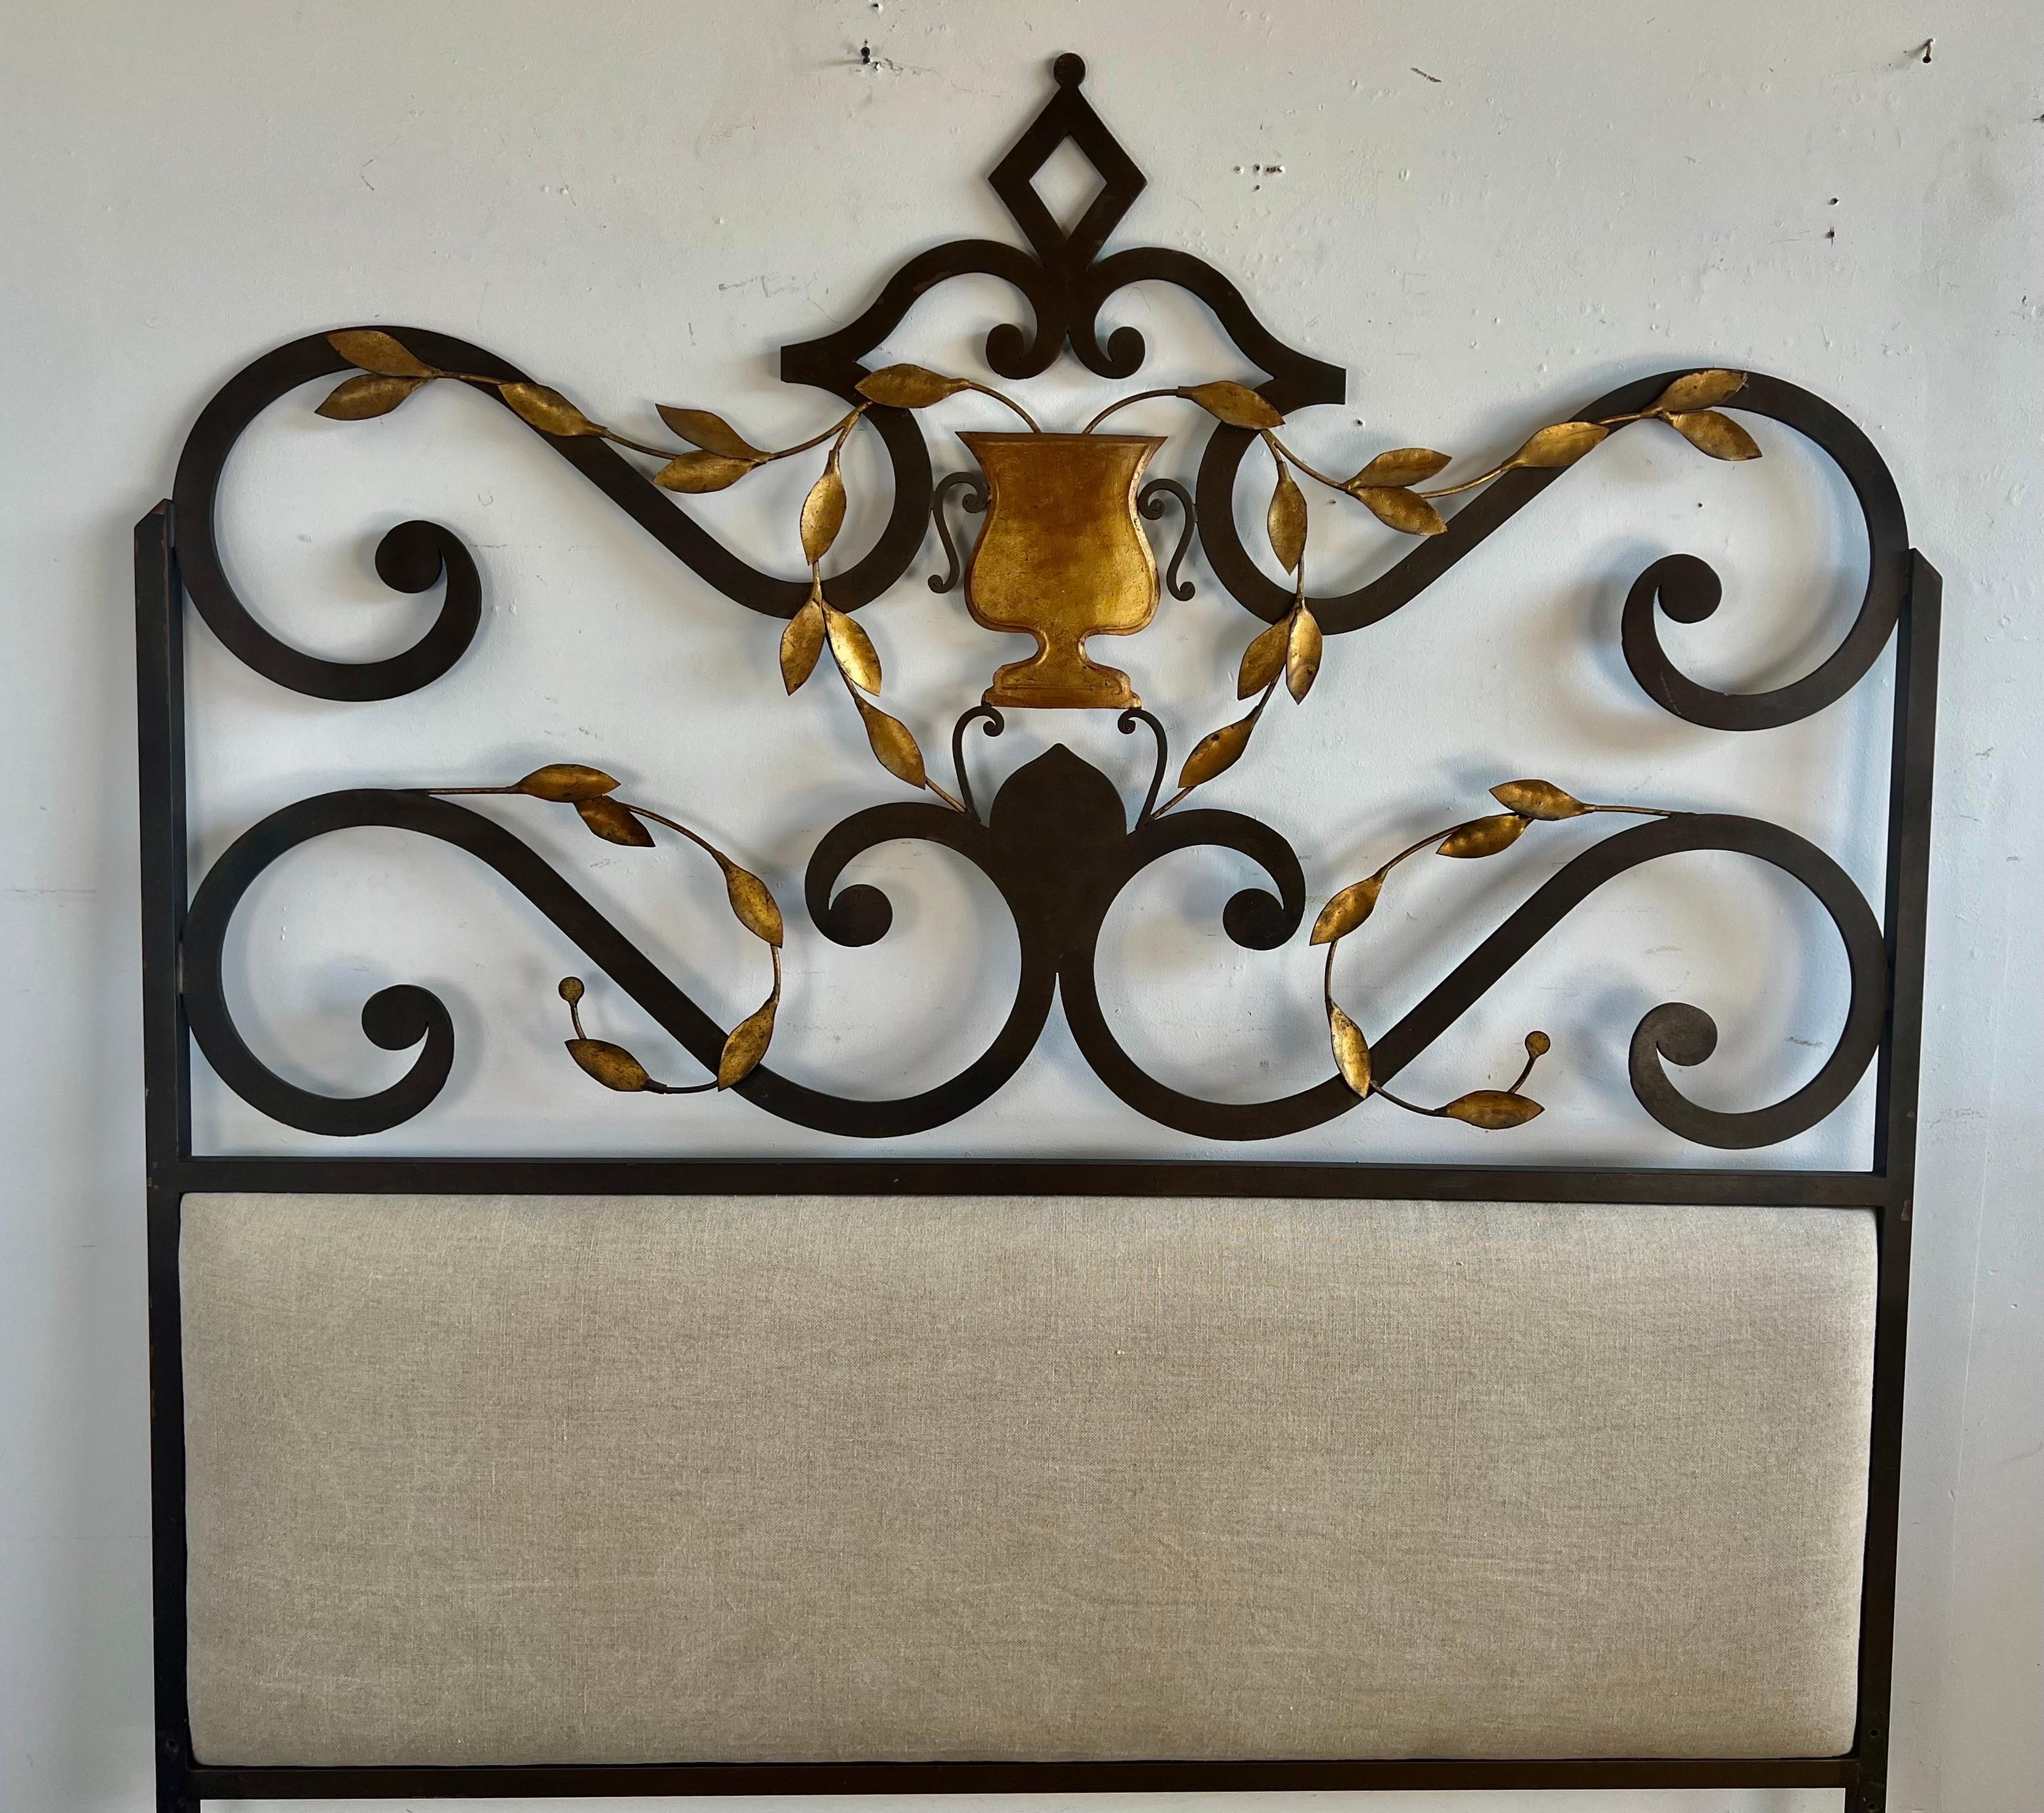 Baroque Spanish Wrought Iron Headboard with Gold Leaf Urn Center